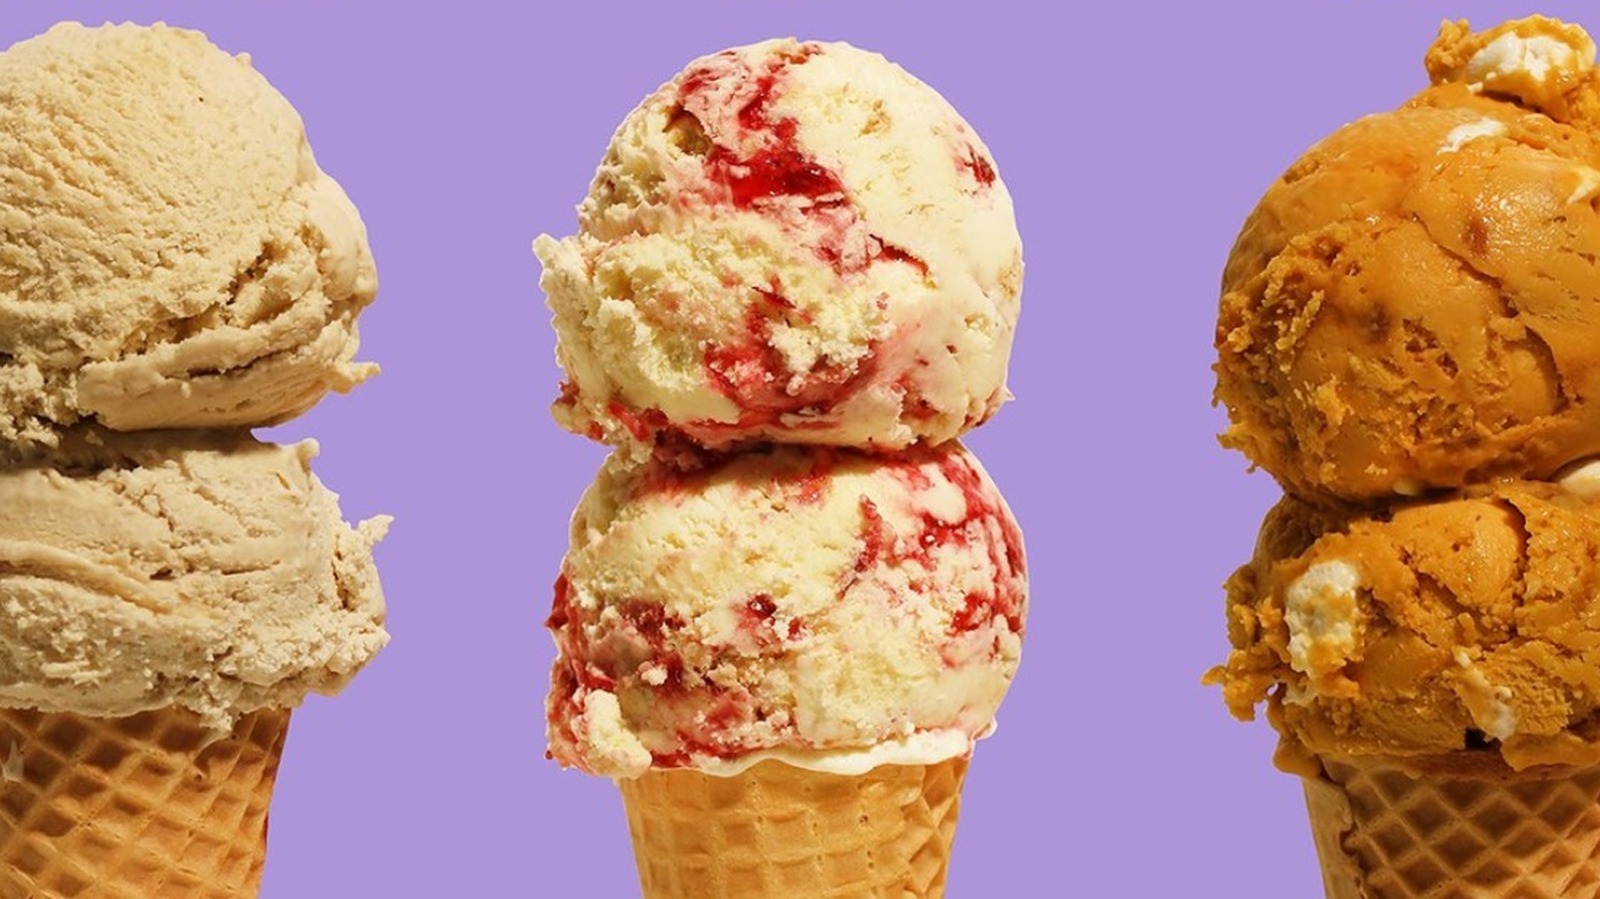 https://www.tastingtable.com/img/gallery/van-leeuwen-announces-4-special-edition-ice-cream-flavors-just-in-time-for-fall/l-intro-1694207183.jpg